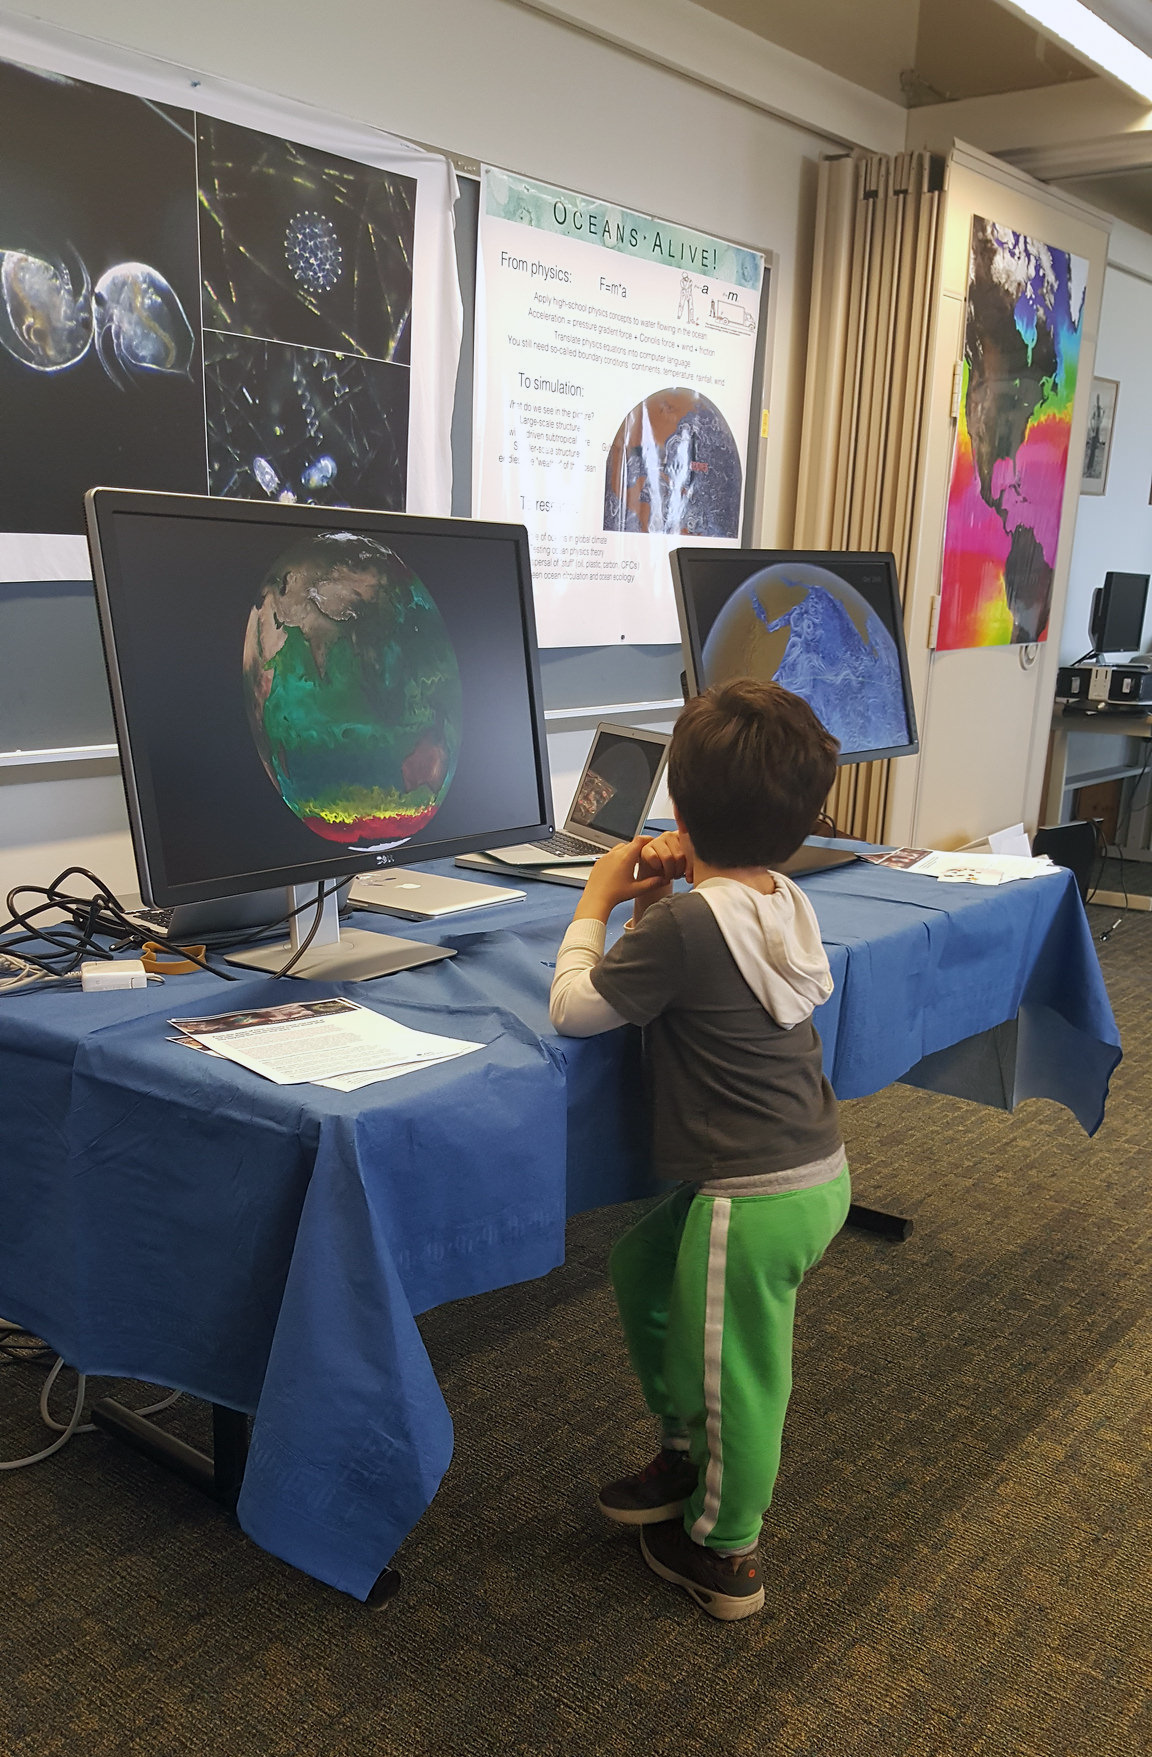 A young boy attends the Oceans Alive! event at MIT's Open House (Image: Deepa Rao)